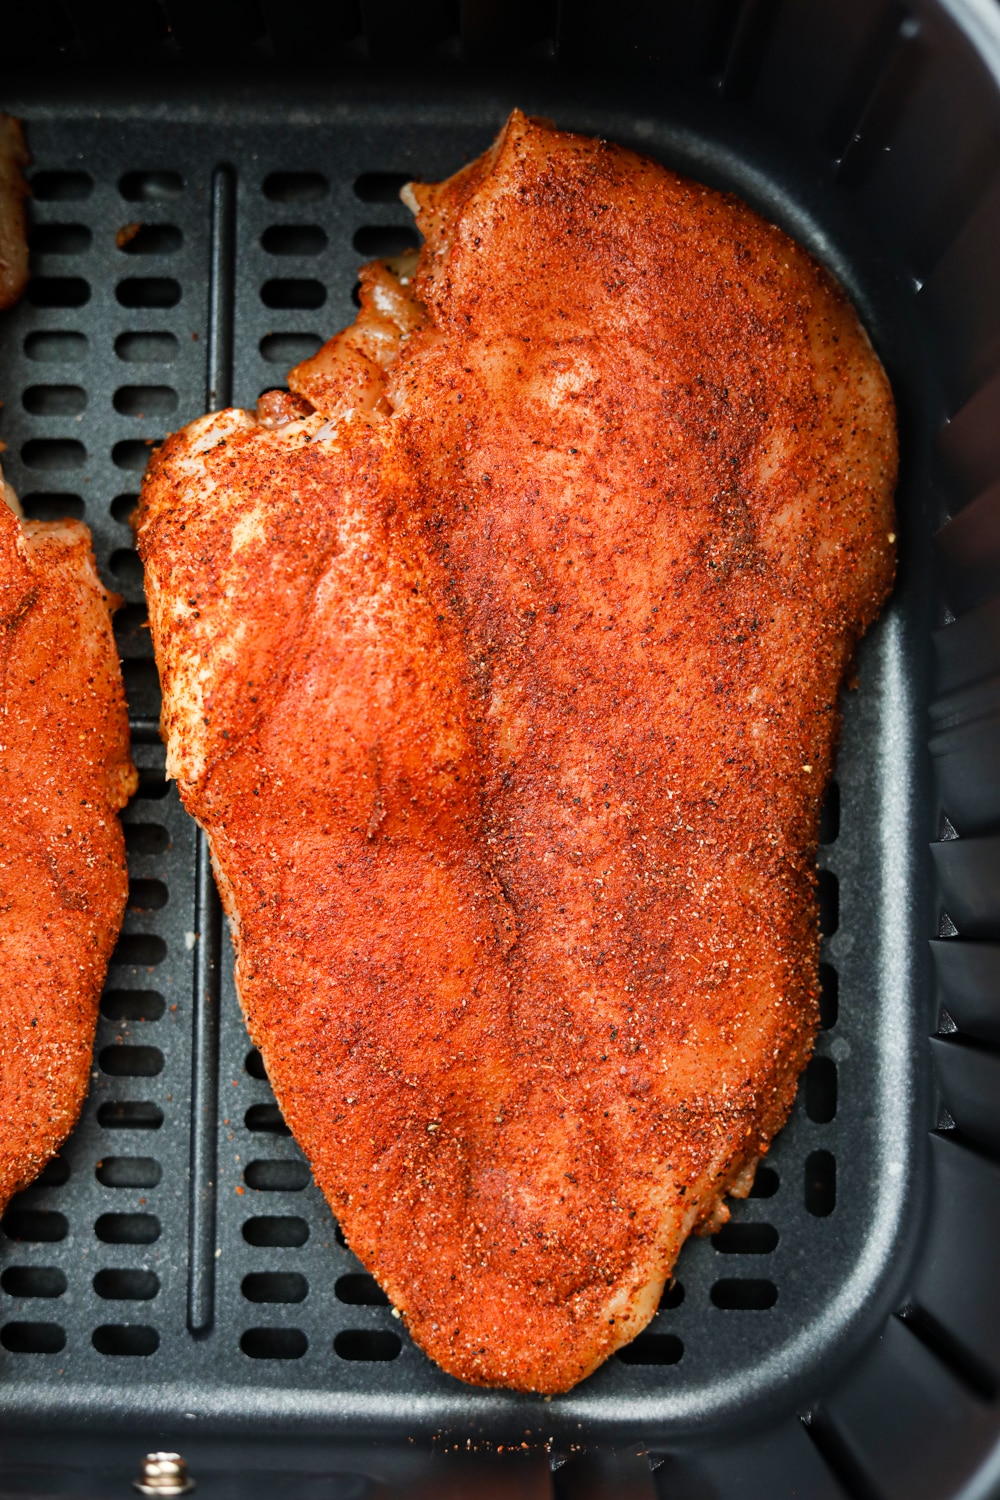 An uncooked chicken breast covered in a dry rub. The chicken breast is in an air fryer basket.